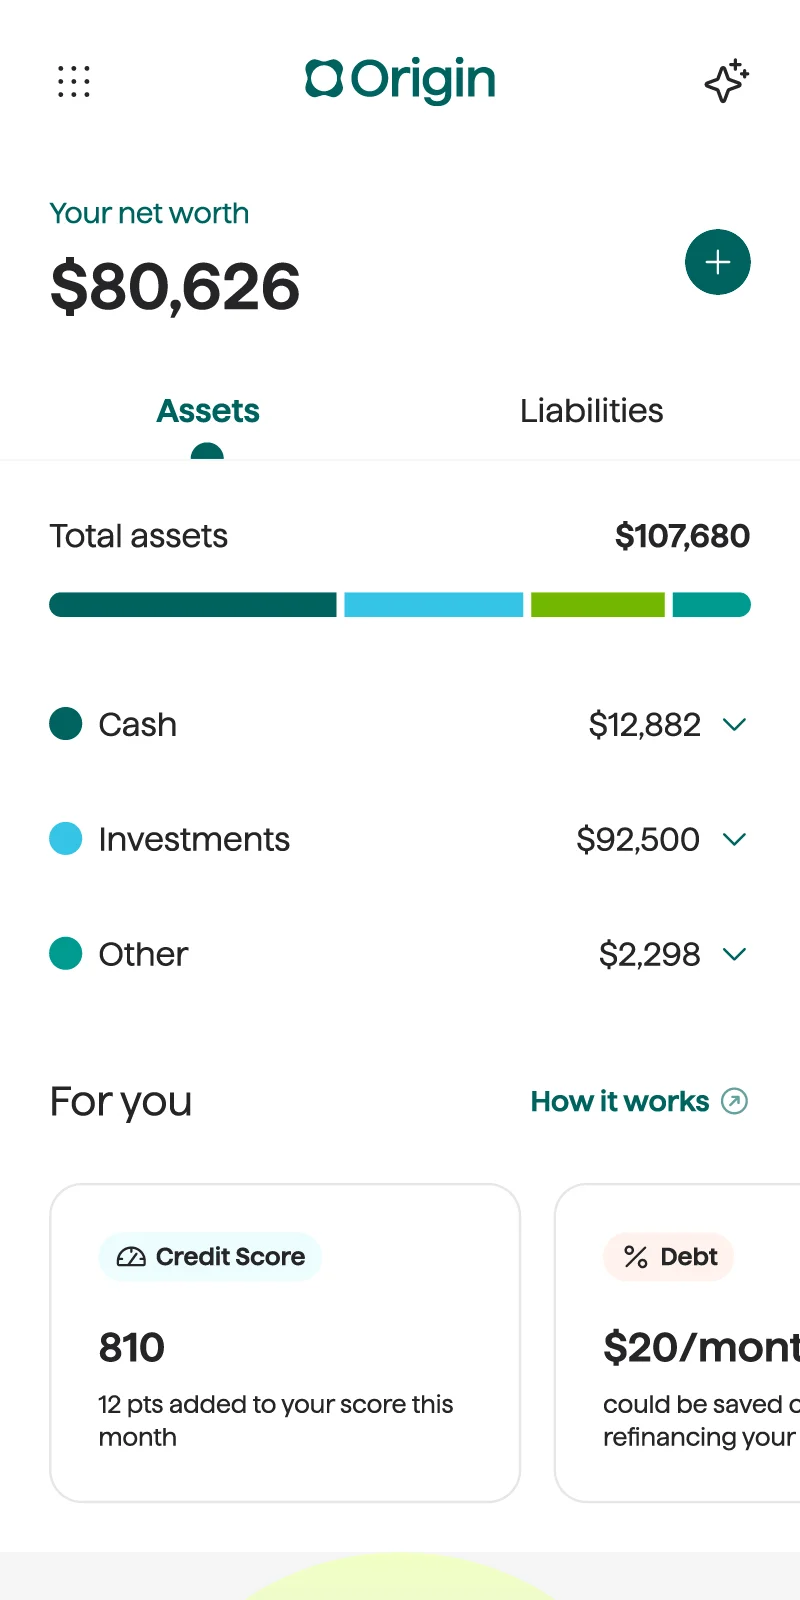 Origin app dashboard displaying 'Your net worth' of $80,626 along with breakdown of cash, investments and other categories. Below you have financial insights and recommendations.